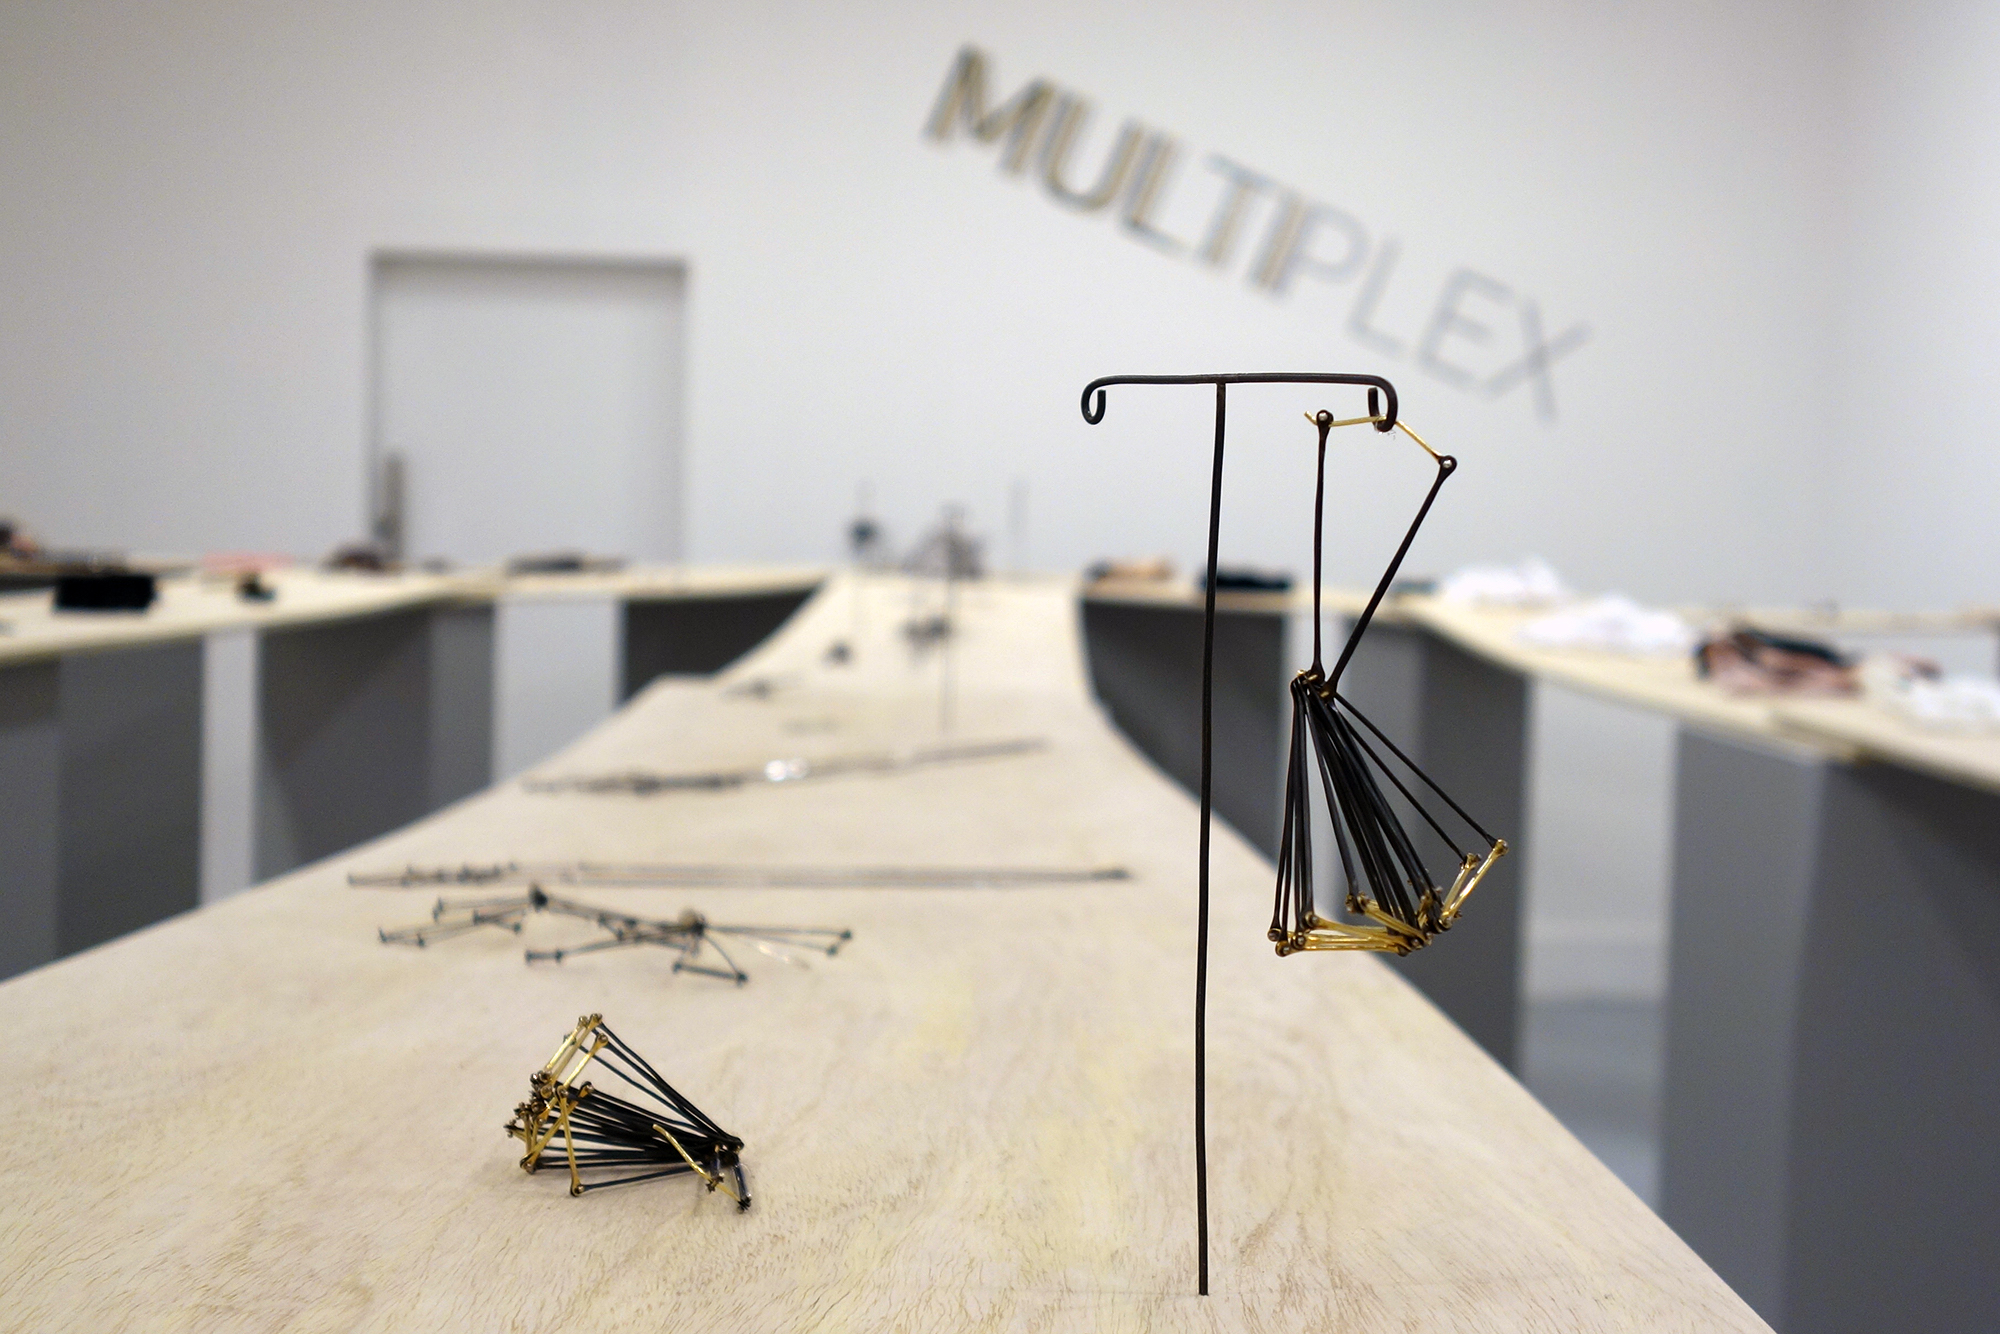 Installation view of Multiplex at Steuben Gallery, with work by Kristine Bolhuis